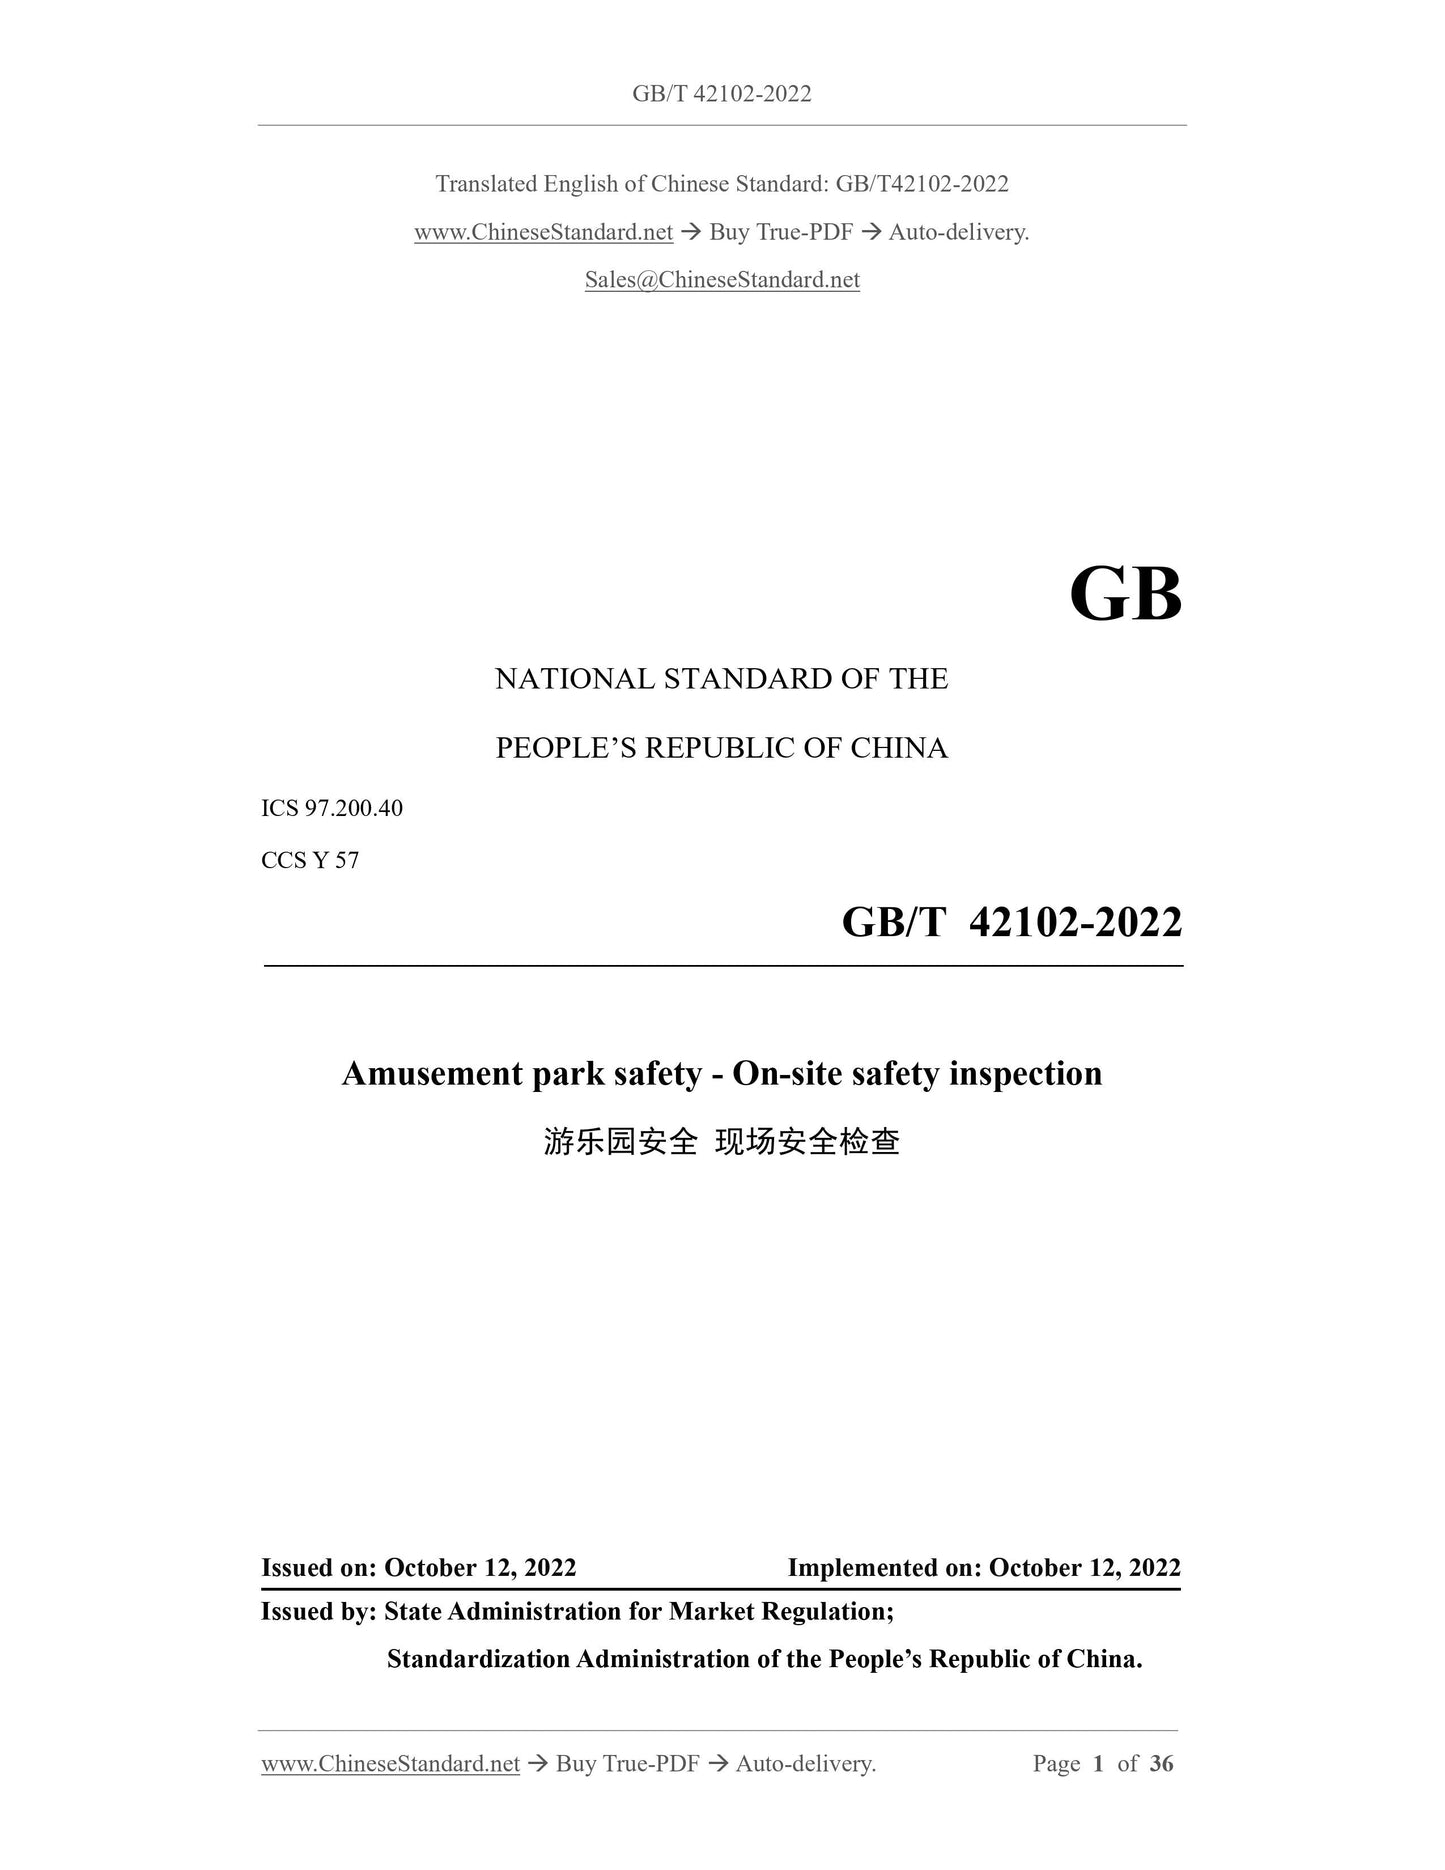 GB/T 42102-2022 Page 1